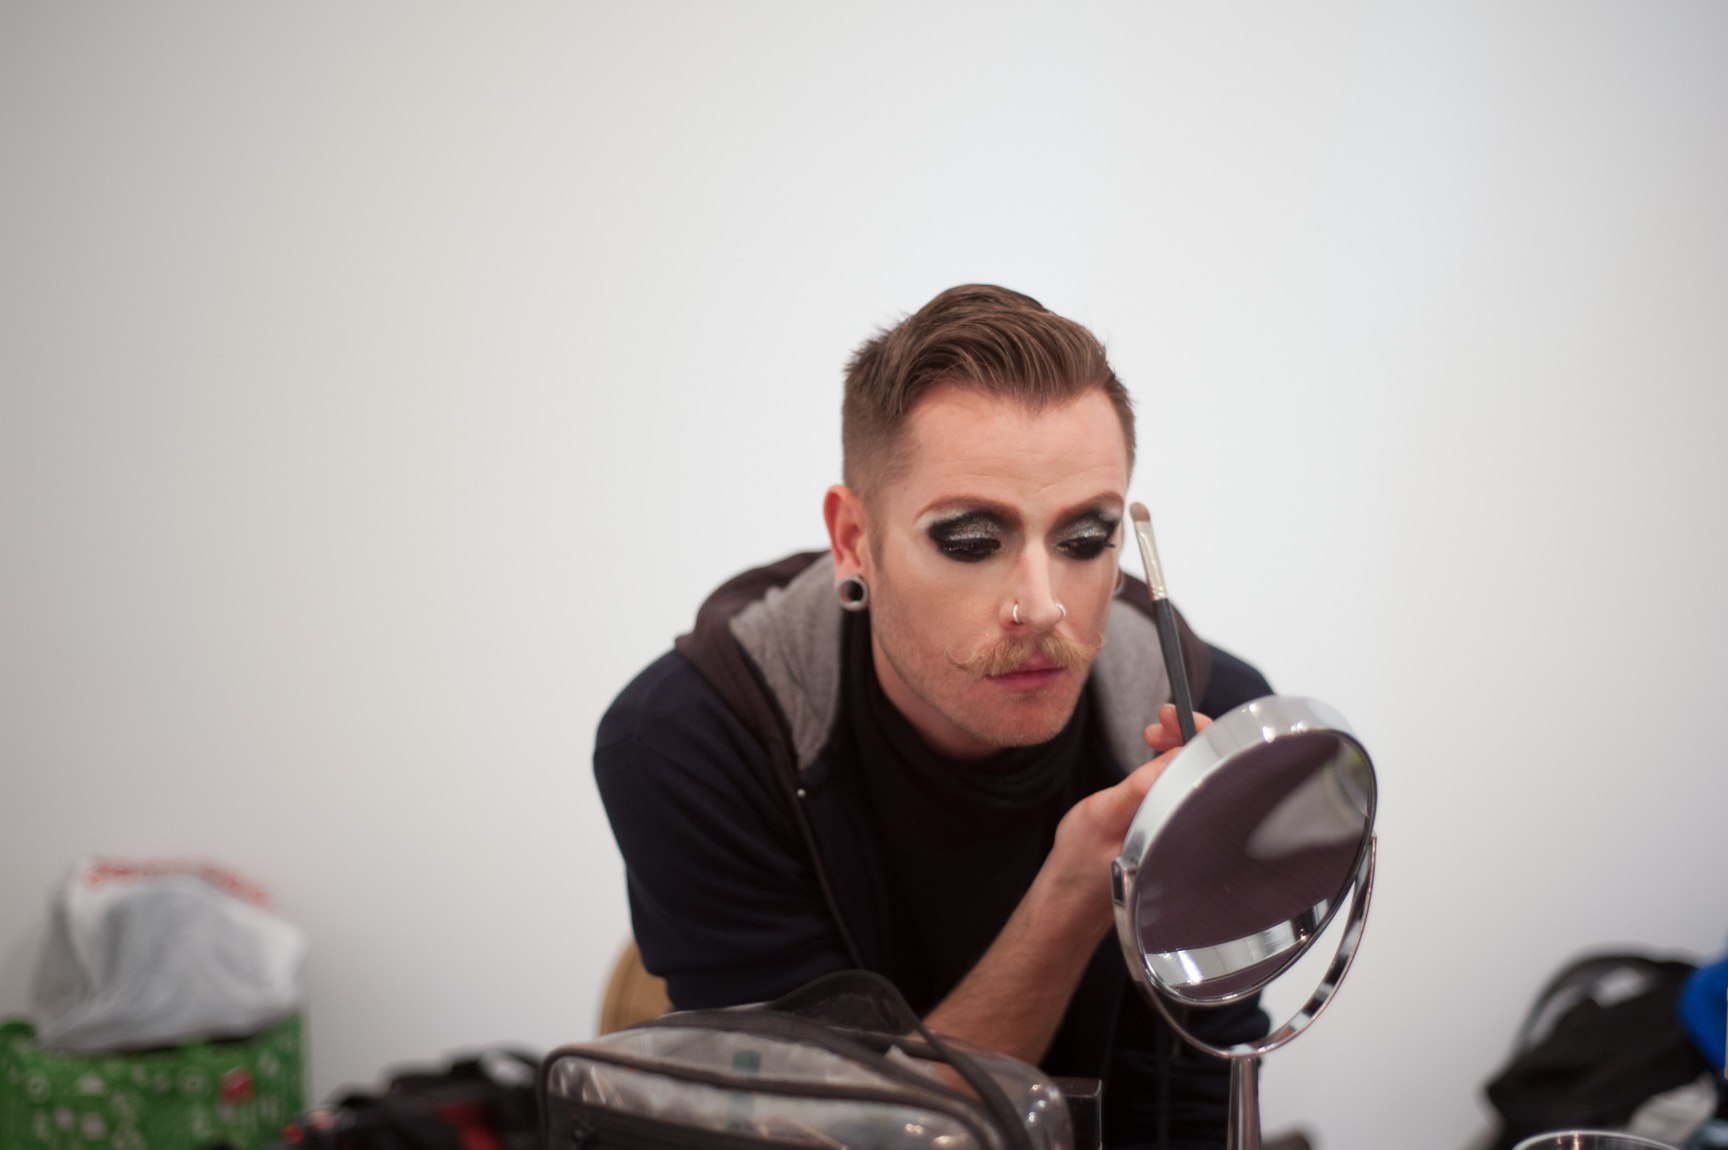 Performer applies their makeup before the drag show.